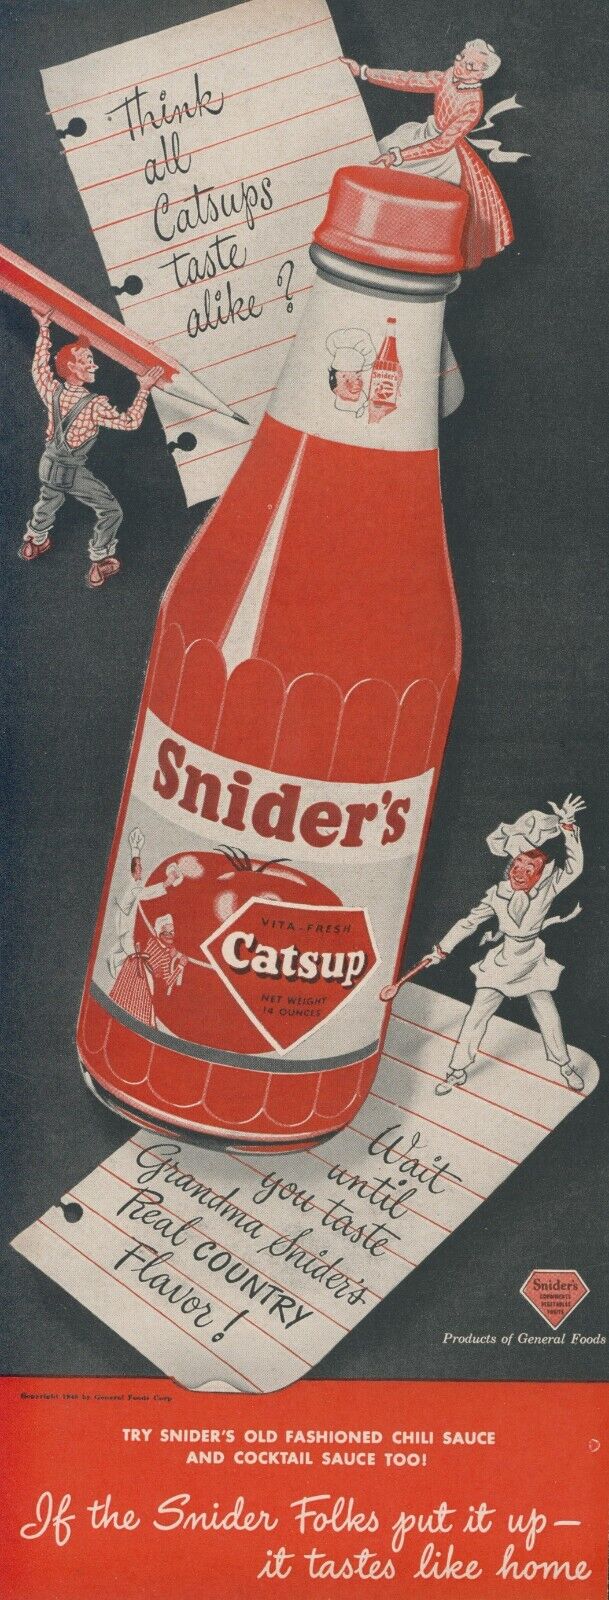 1948 Sniders Catsup Giant Bottle Pencil Chef Spoon Overalls Vintage Print Ad L13